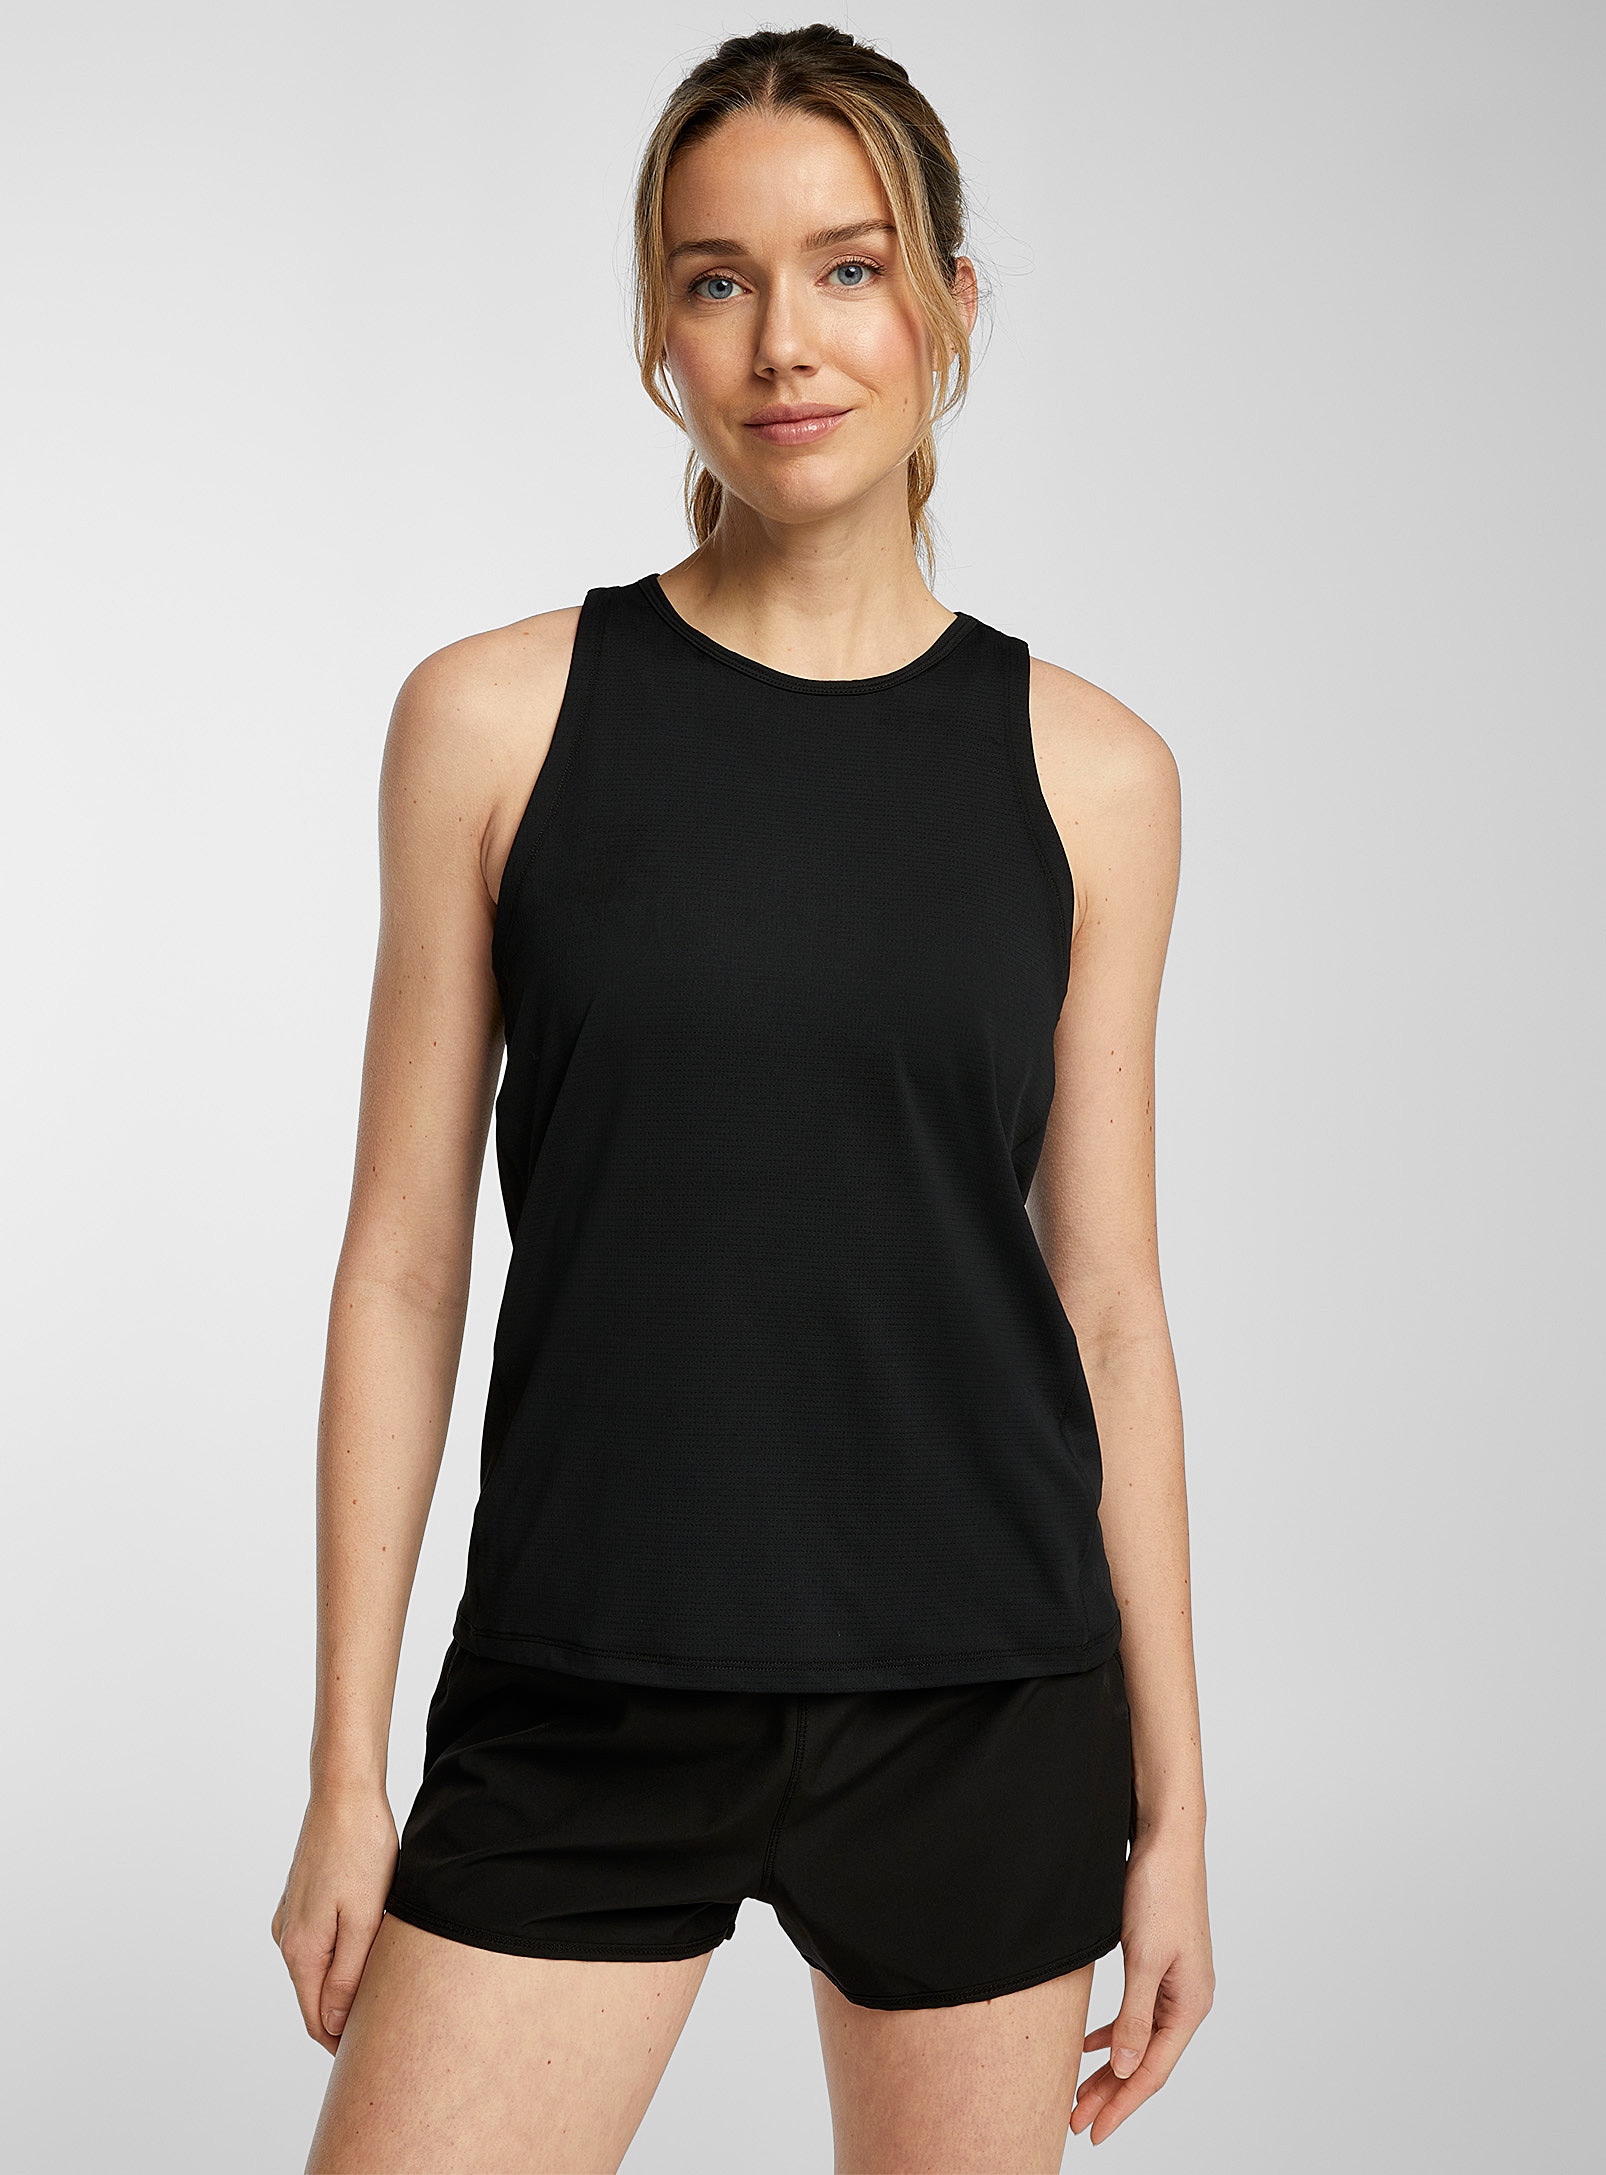 I.fiv5 Micro-perforated Tank In Black